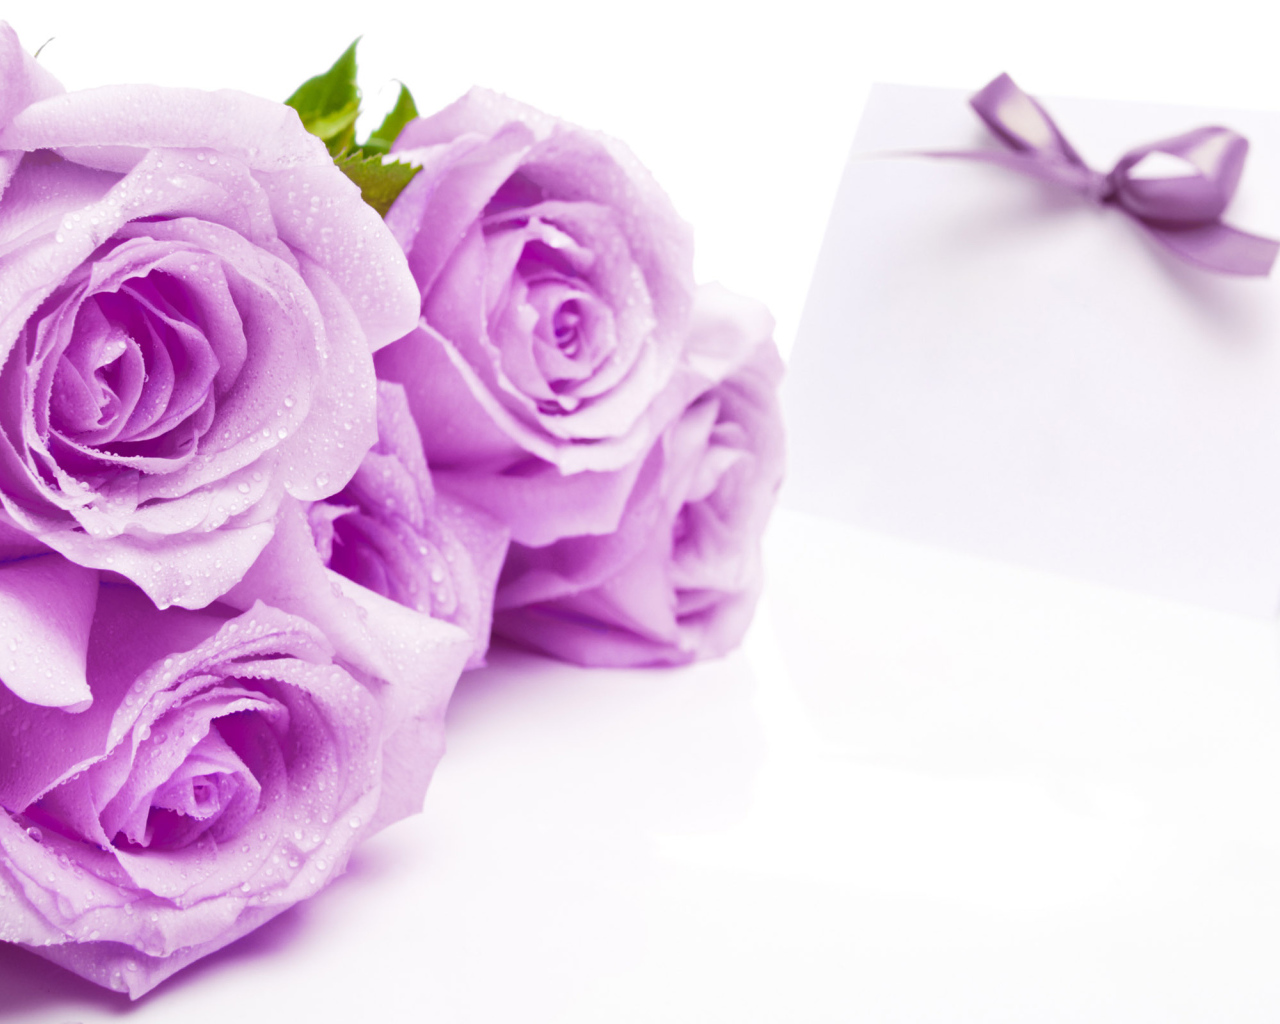 Bouquet of purple roses on March 8 for the beloved